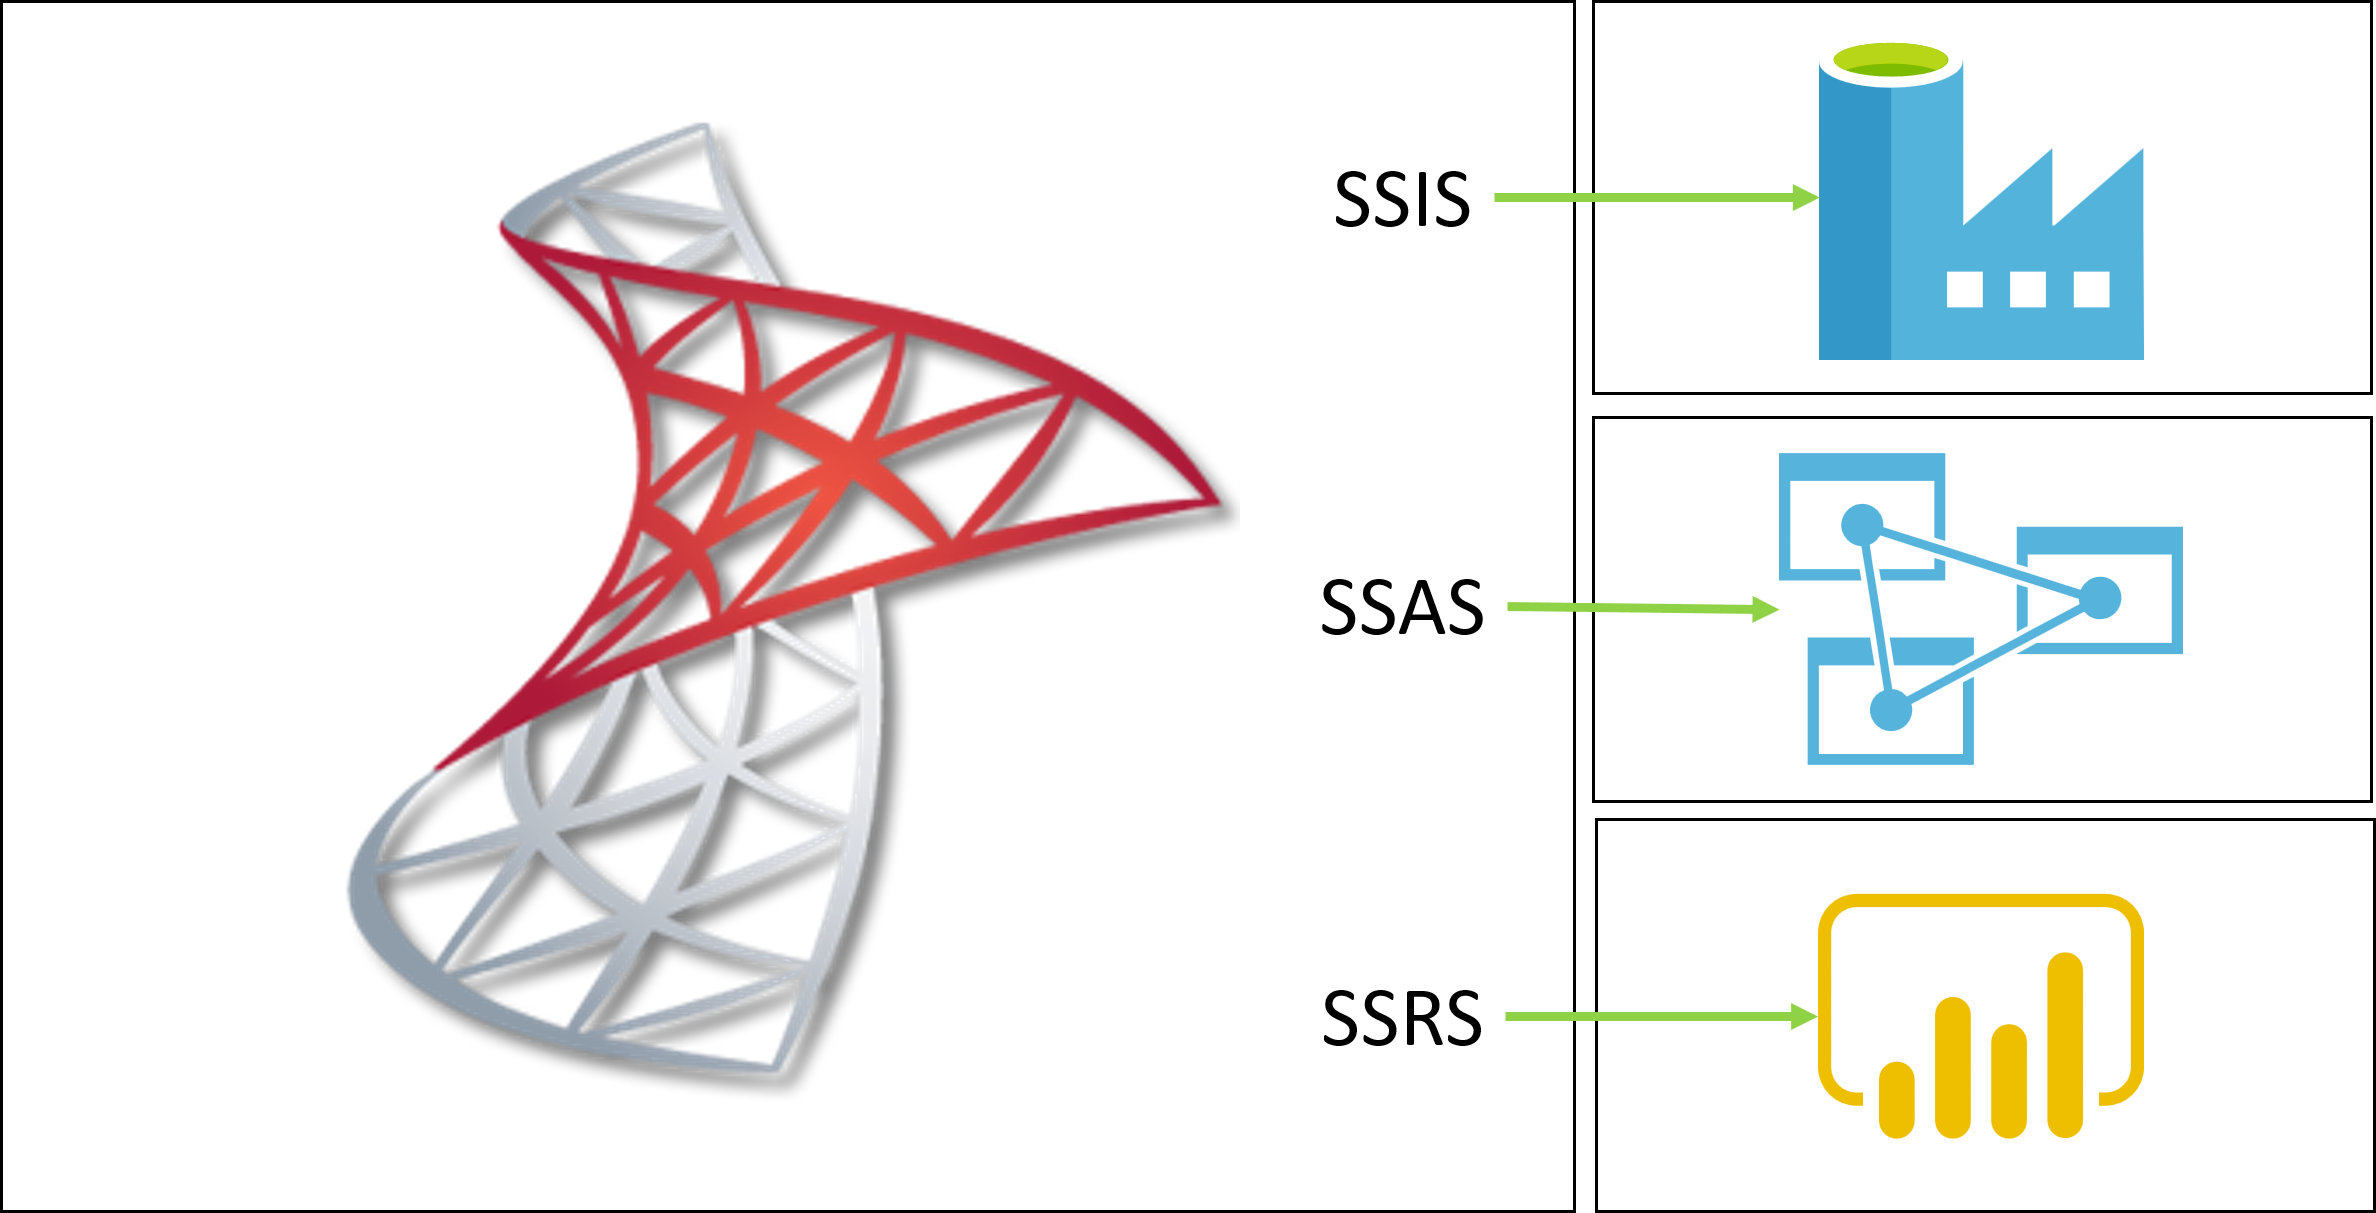 Ssis 088